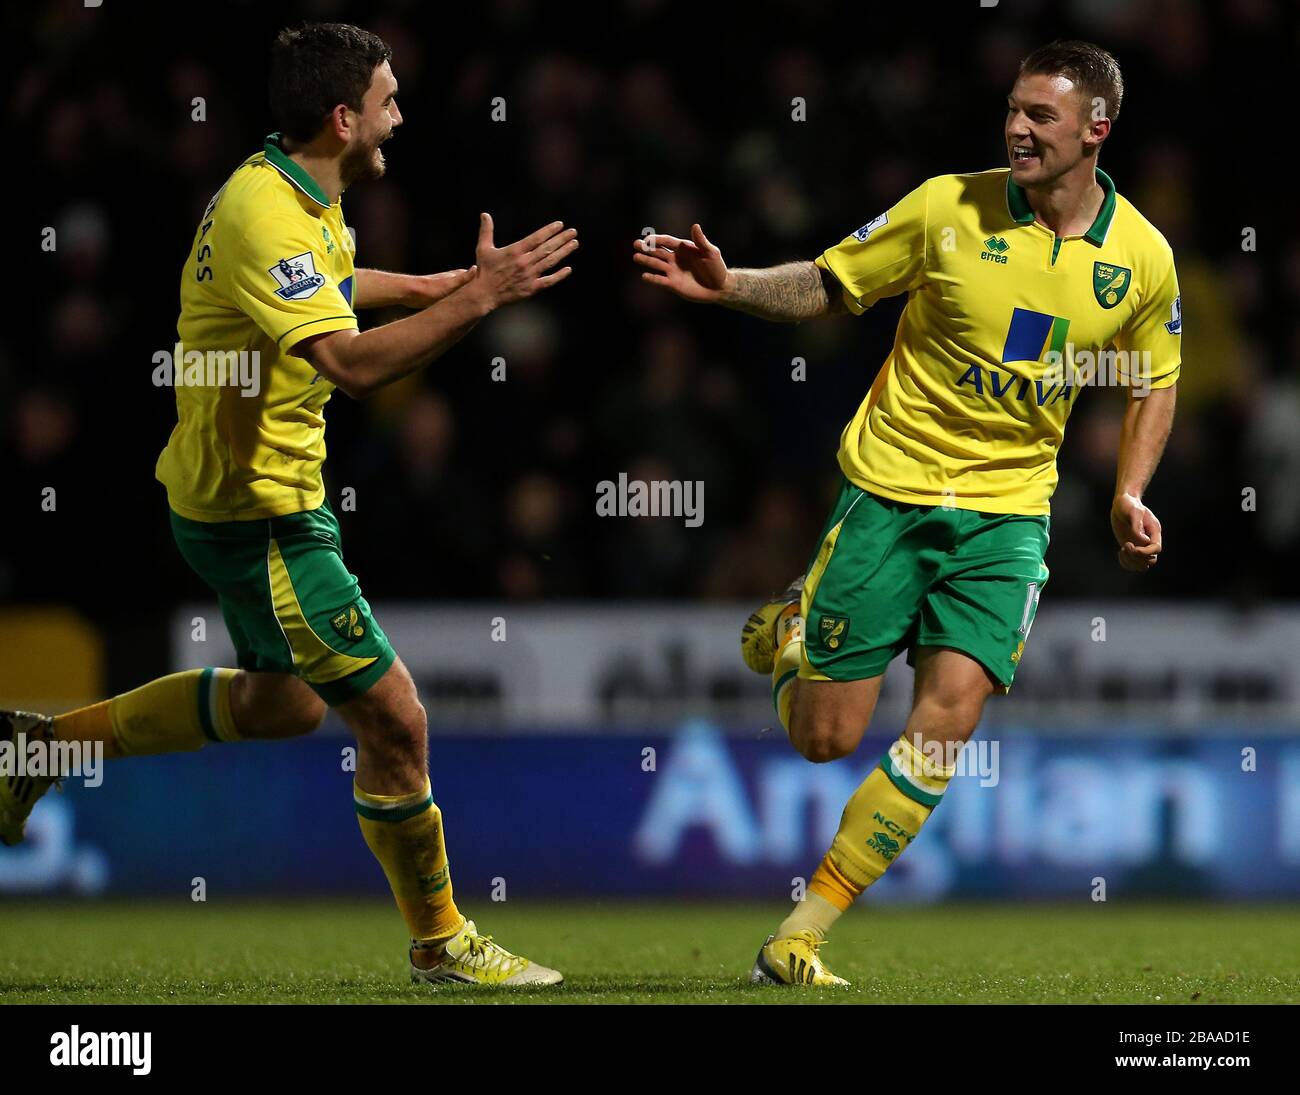 Norwich City's Anthony Pilkington (right) celebrates scoring his teams second goal of the game with teammate Robert Snodgrass (left) Stock Photo